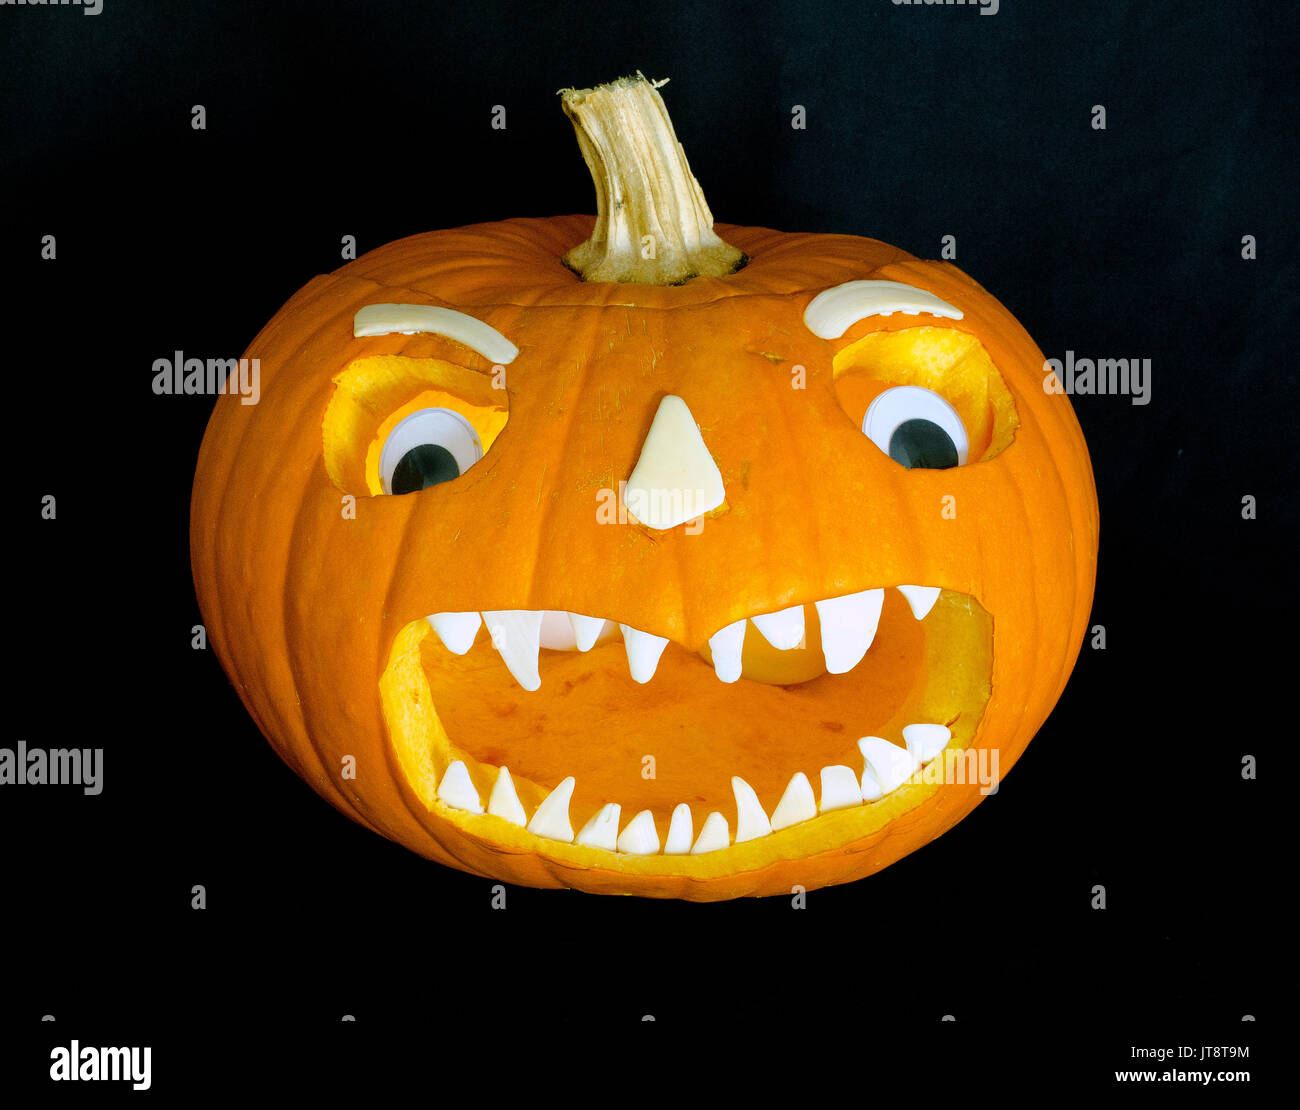 This scary jack-o'-lantern face that was cut into a hollowed-out orange pumpkin was enhanced with sun-bleached white seashells for teeth, nose and eyebrows, plus a pair of plastic toy eyes. Carving jack-o'-lanterns is a tradition for Halloween, which evolved from All Hallows' Eve and continues to be celebrated annually on October 31. Stock Photo